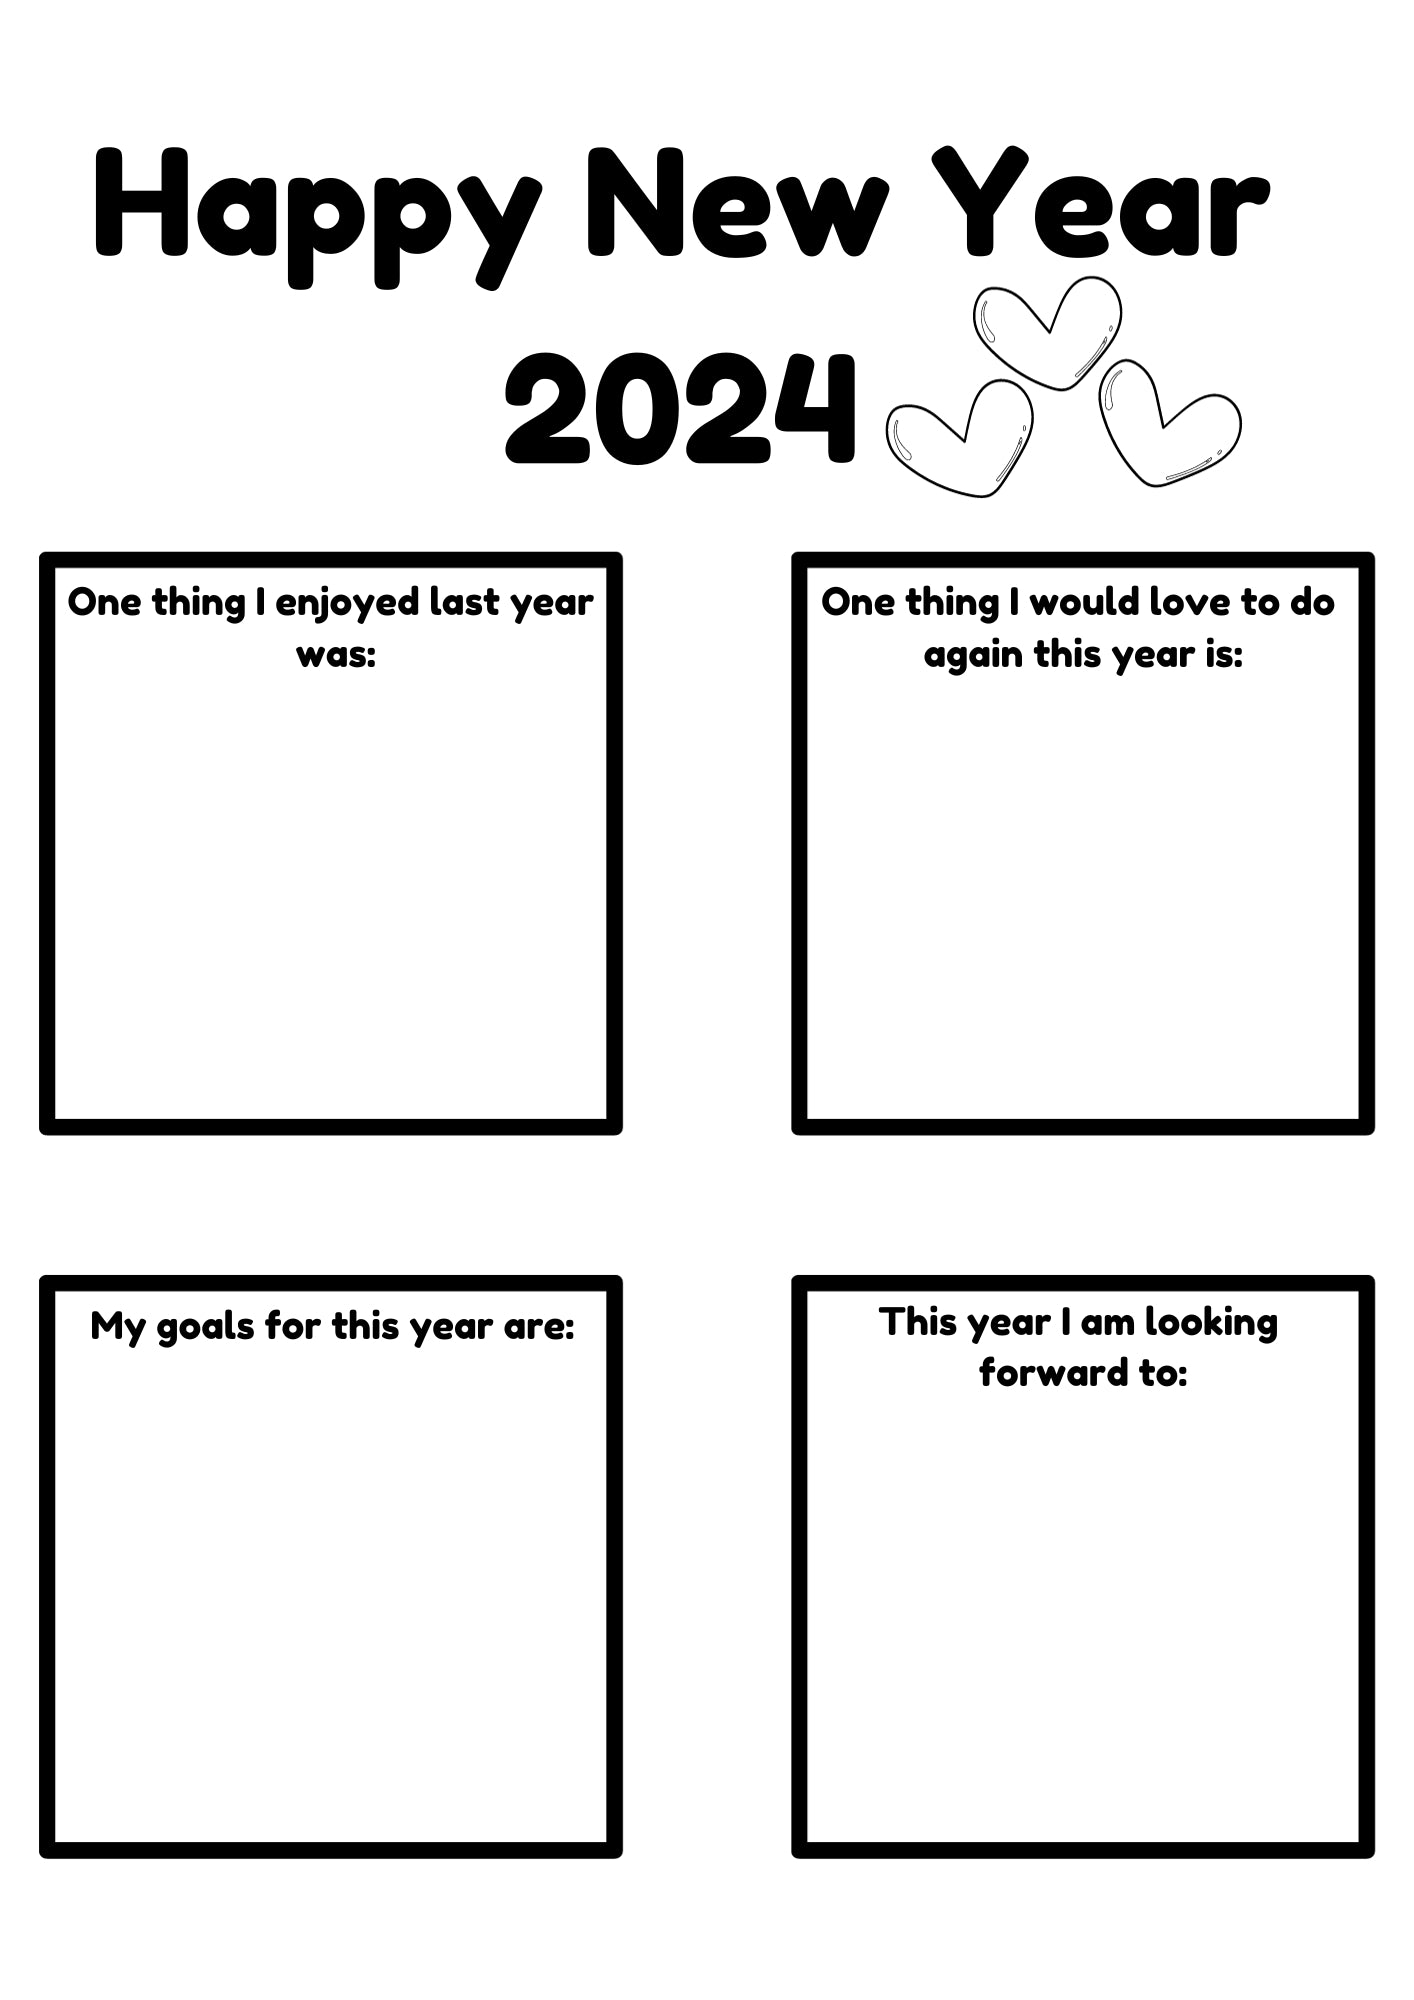 Happy New Year 2024, goal setting and reflection resource digital download